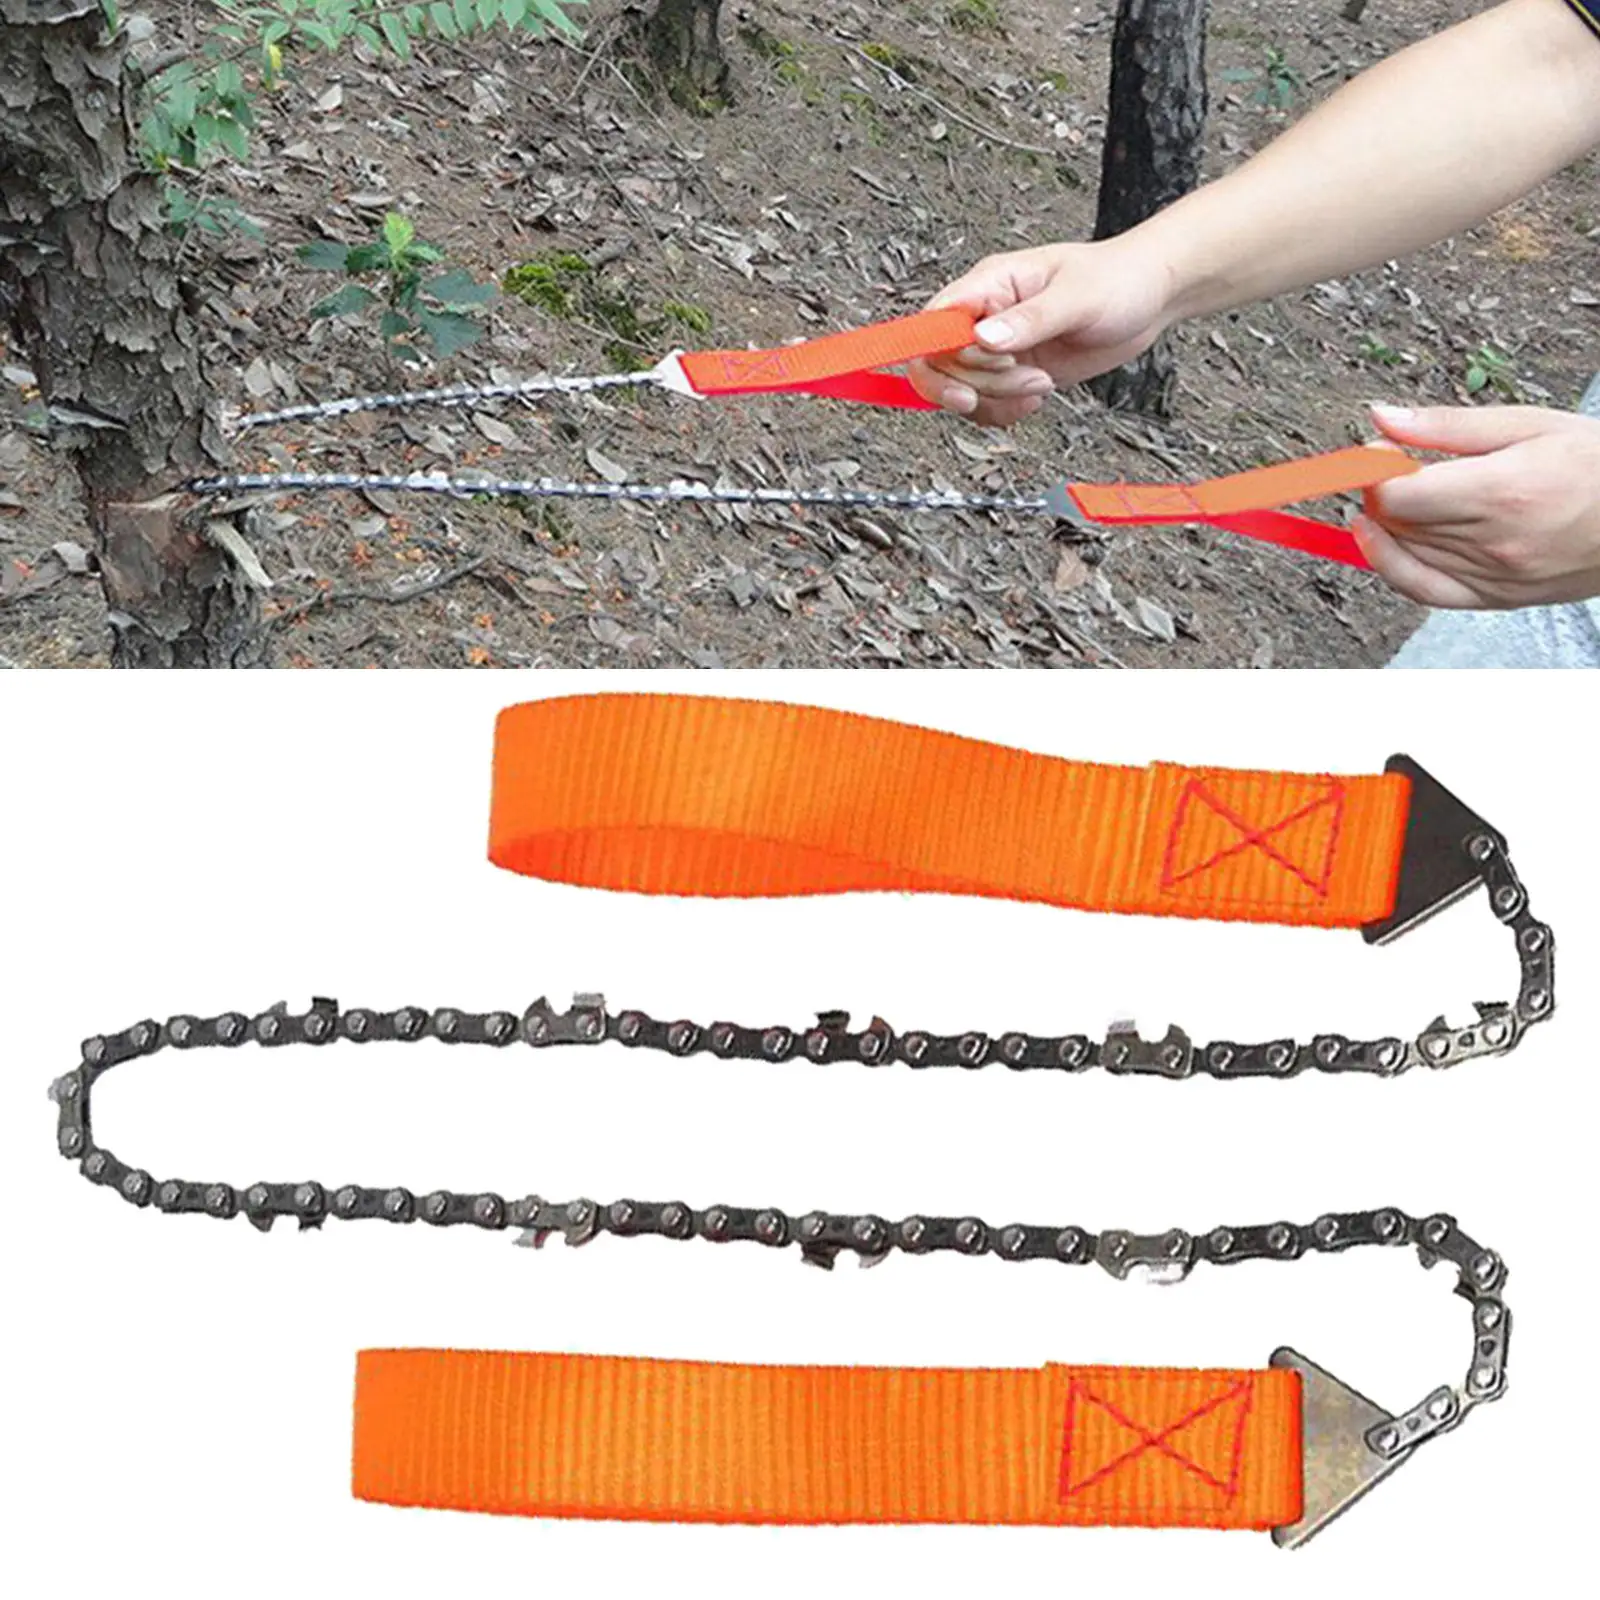   Wire Saw Chainsaw Camping Hiking Hunting Survival Emergency Kit